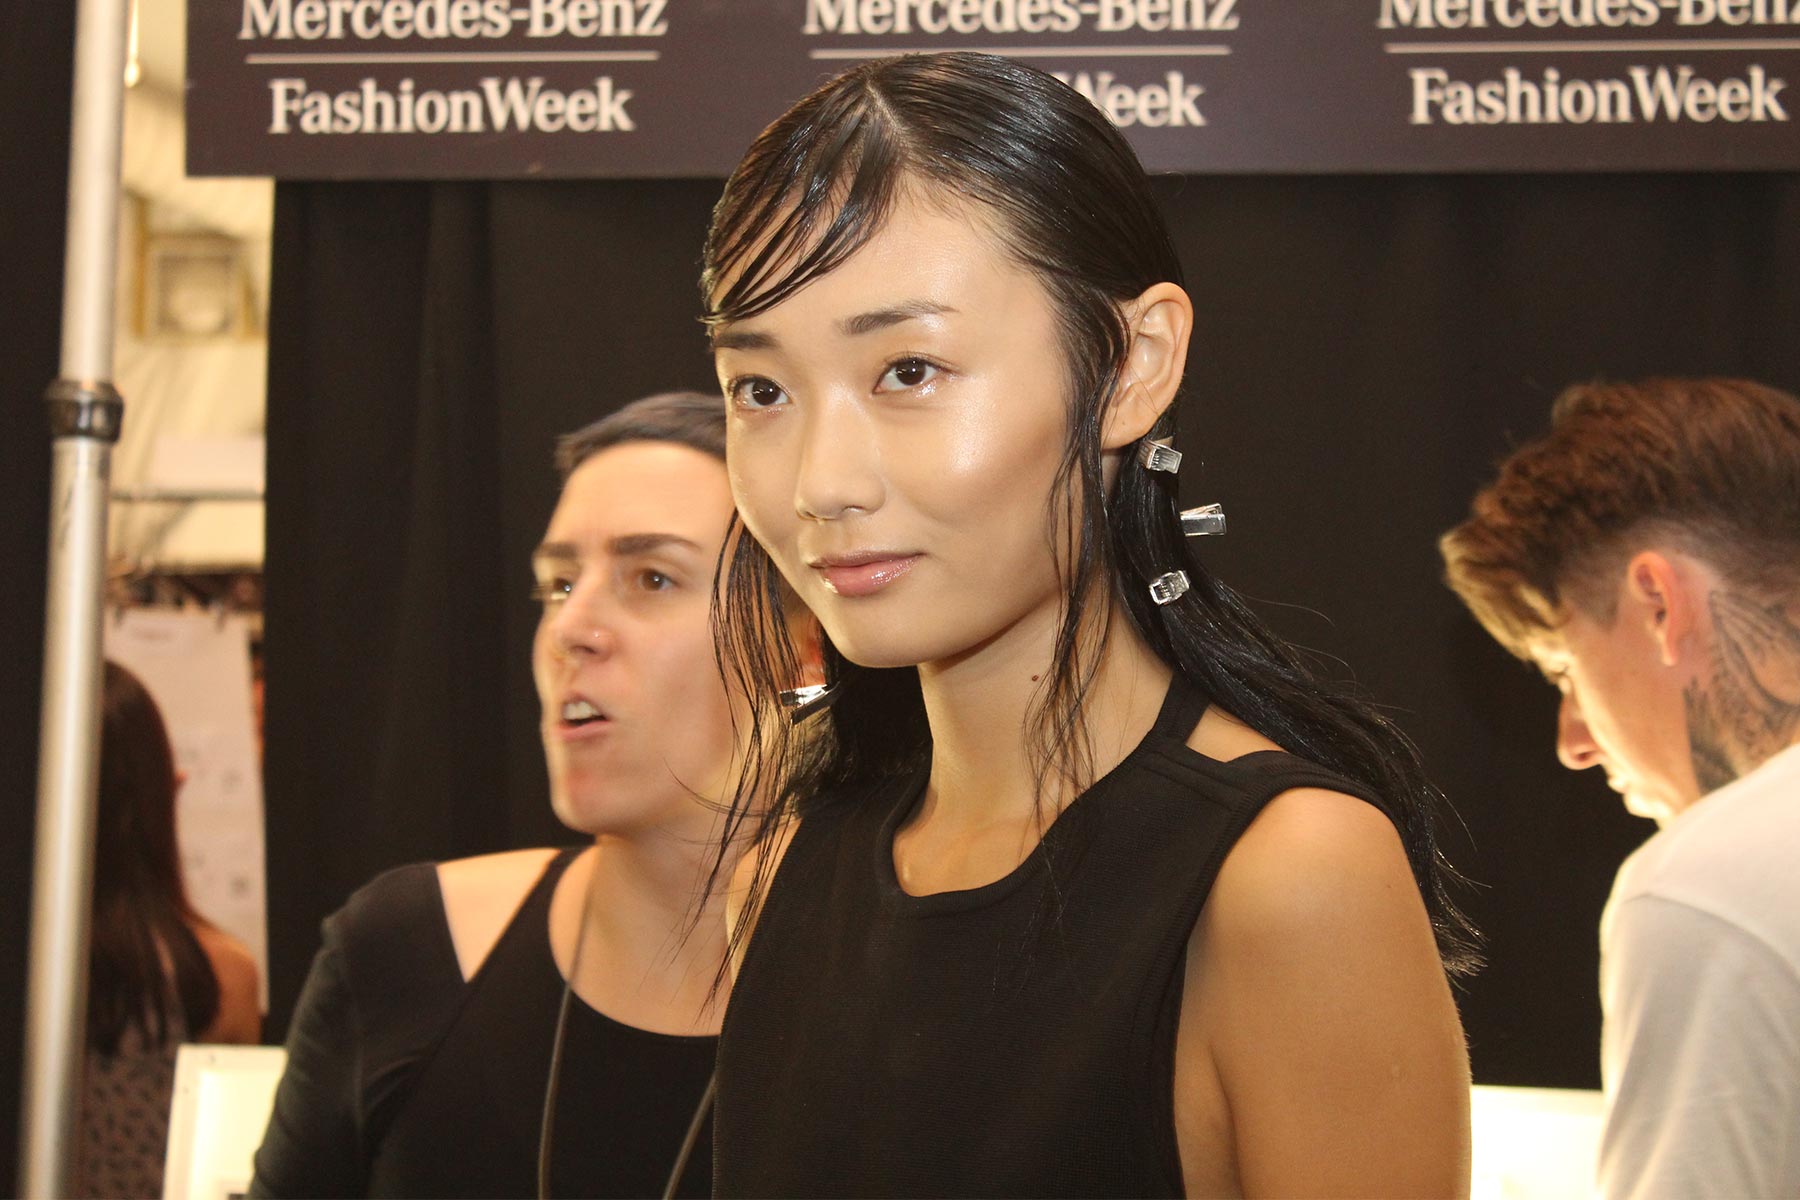 Interview with VIVIENNE TAM S/S 2015 MBFW